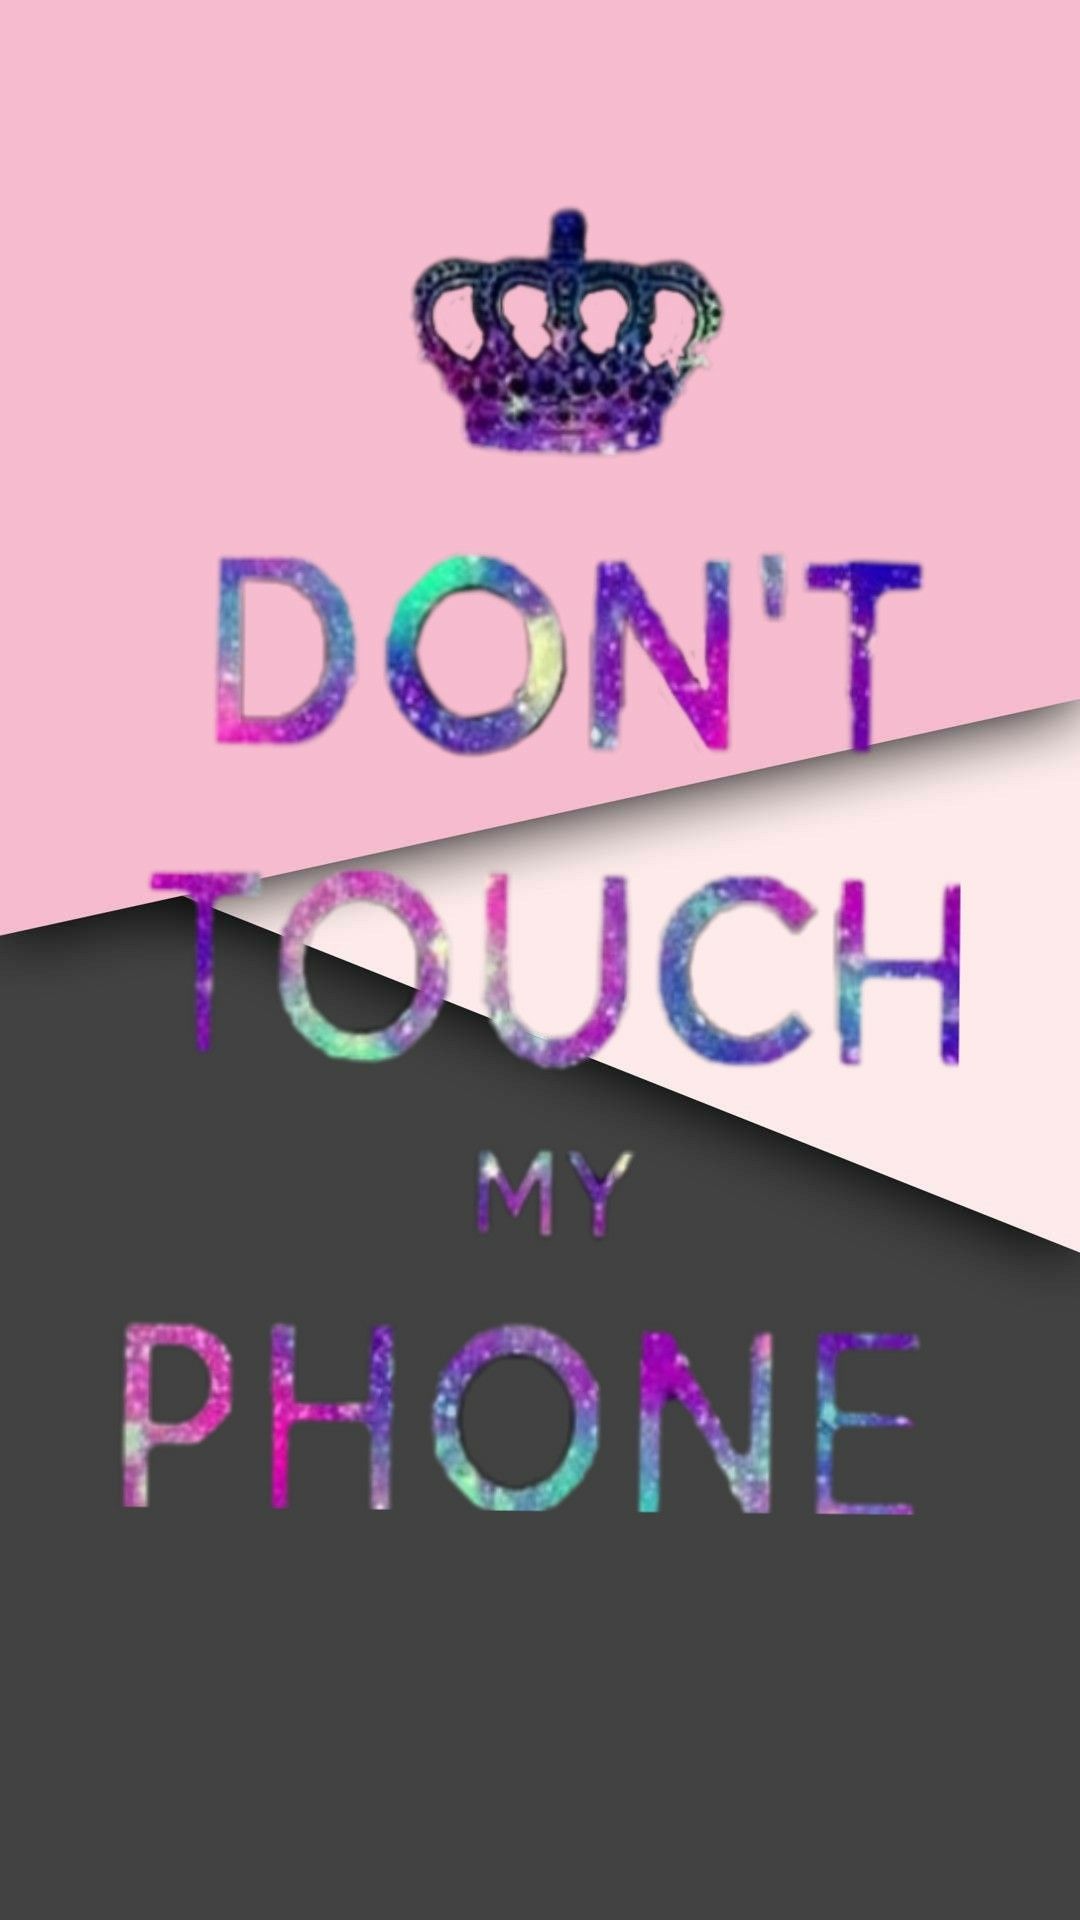 Don't touch my phone wallpaper for girls - Don't touch my phone